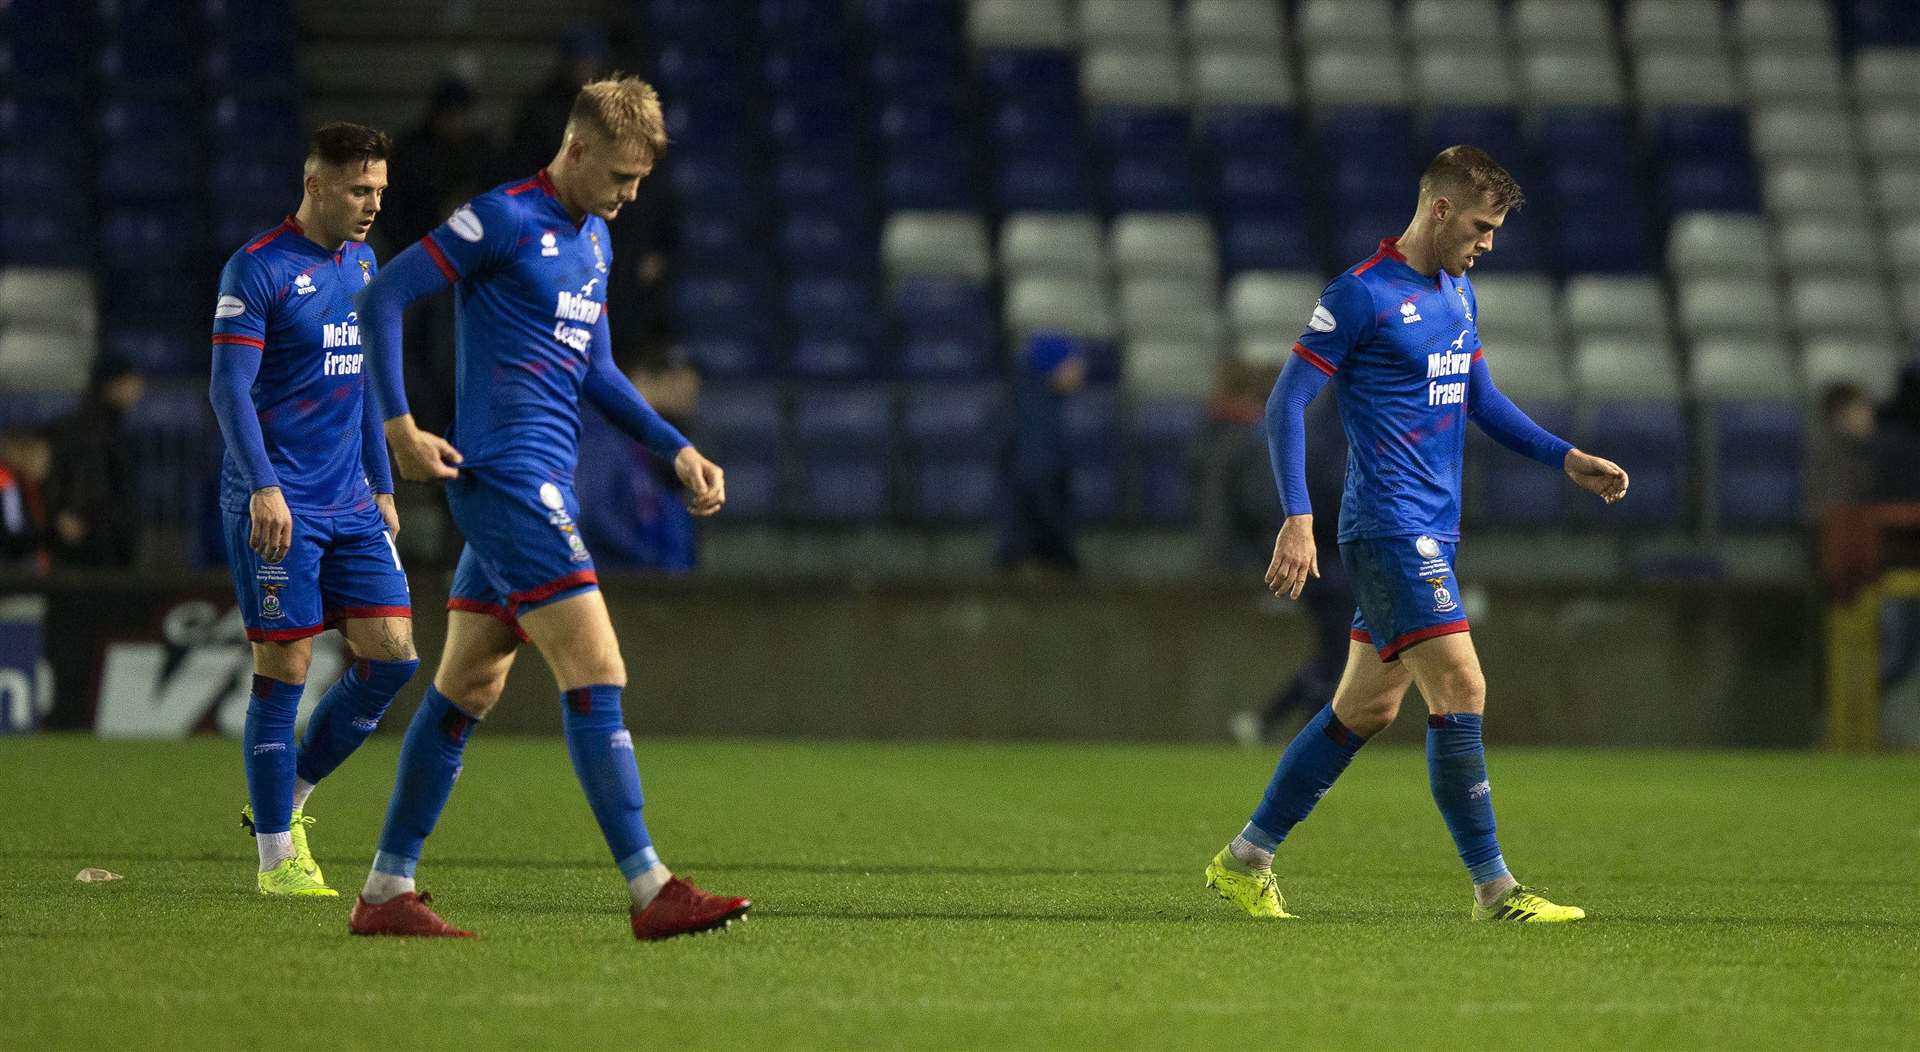 Picture - Ken Macpherson, Inverness. Inverness CT(0) v Dundee Utd(3). 02/11/19. Very disappointed ICT players at the end, Miles Storey, Coll Donaldson, and Jamie McCart.